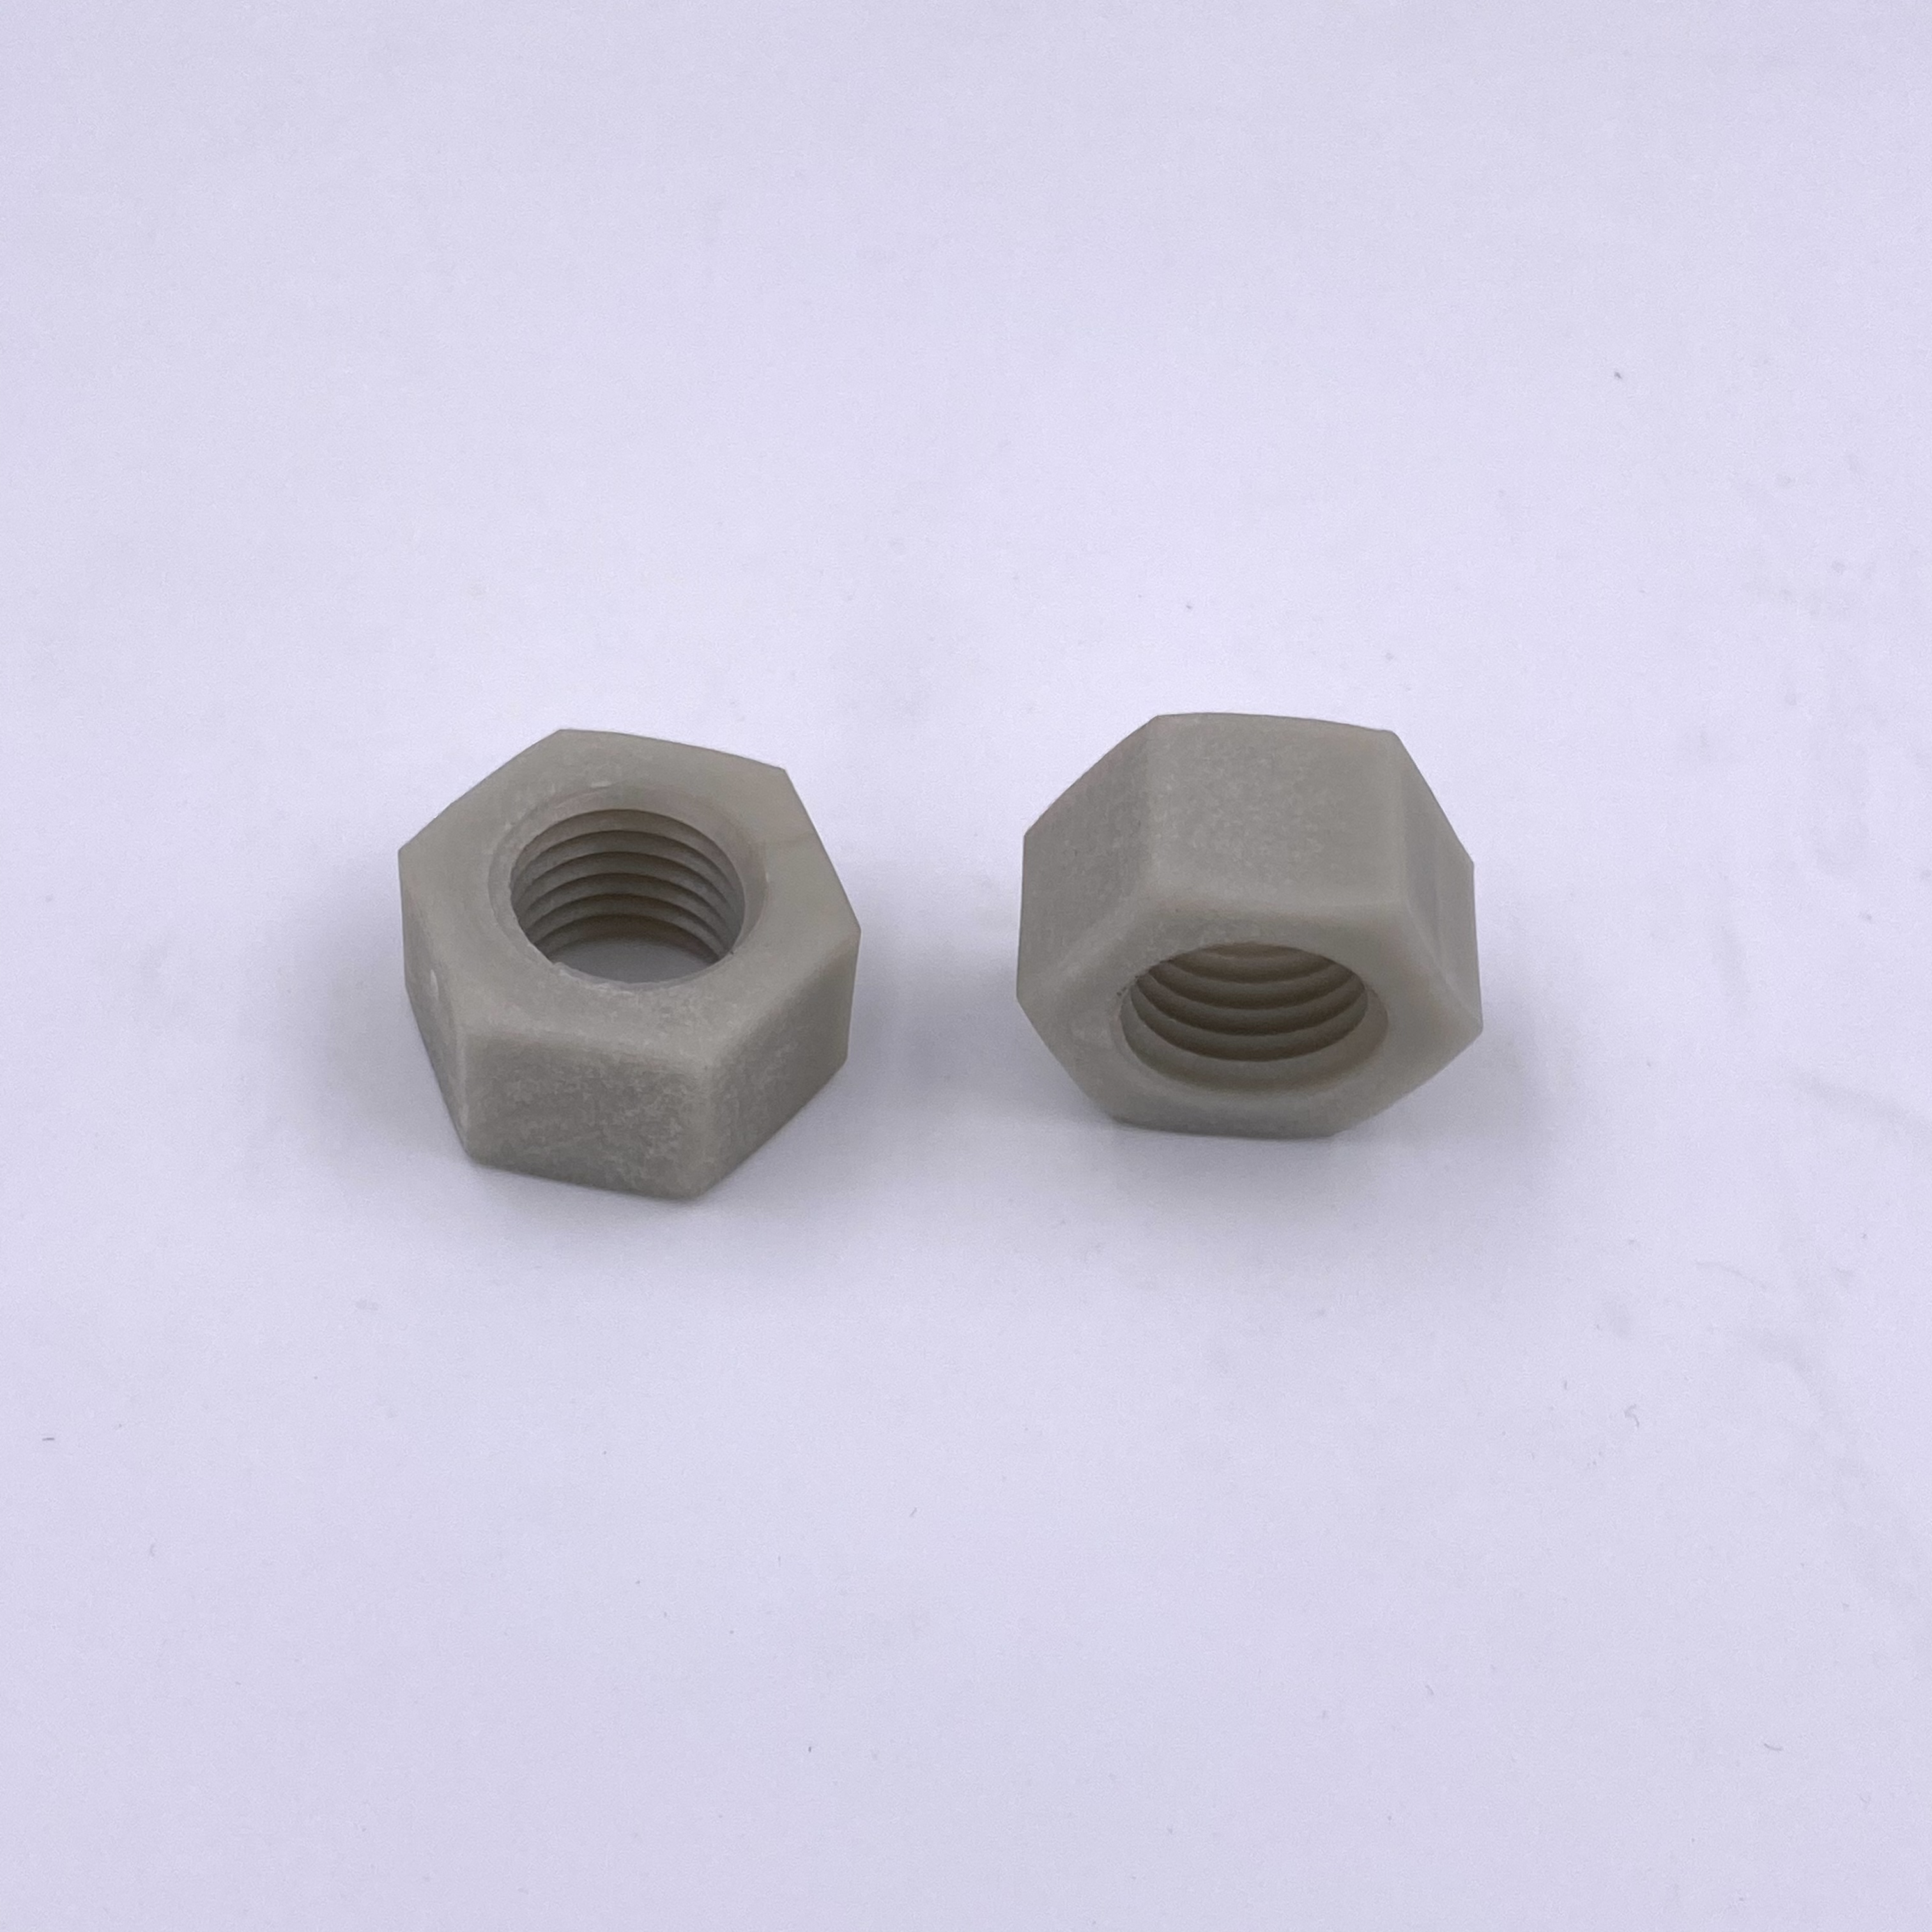 M3-M24  Glass Filled Nylon  Hex Nuts